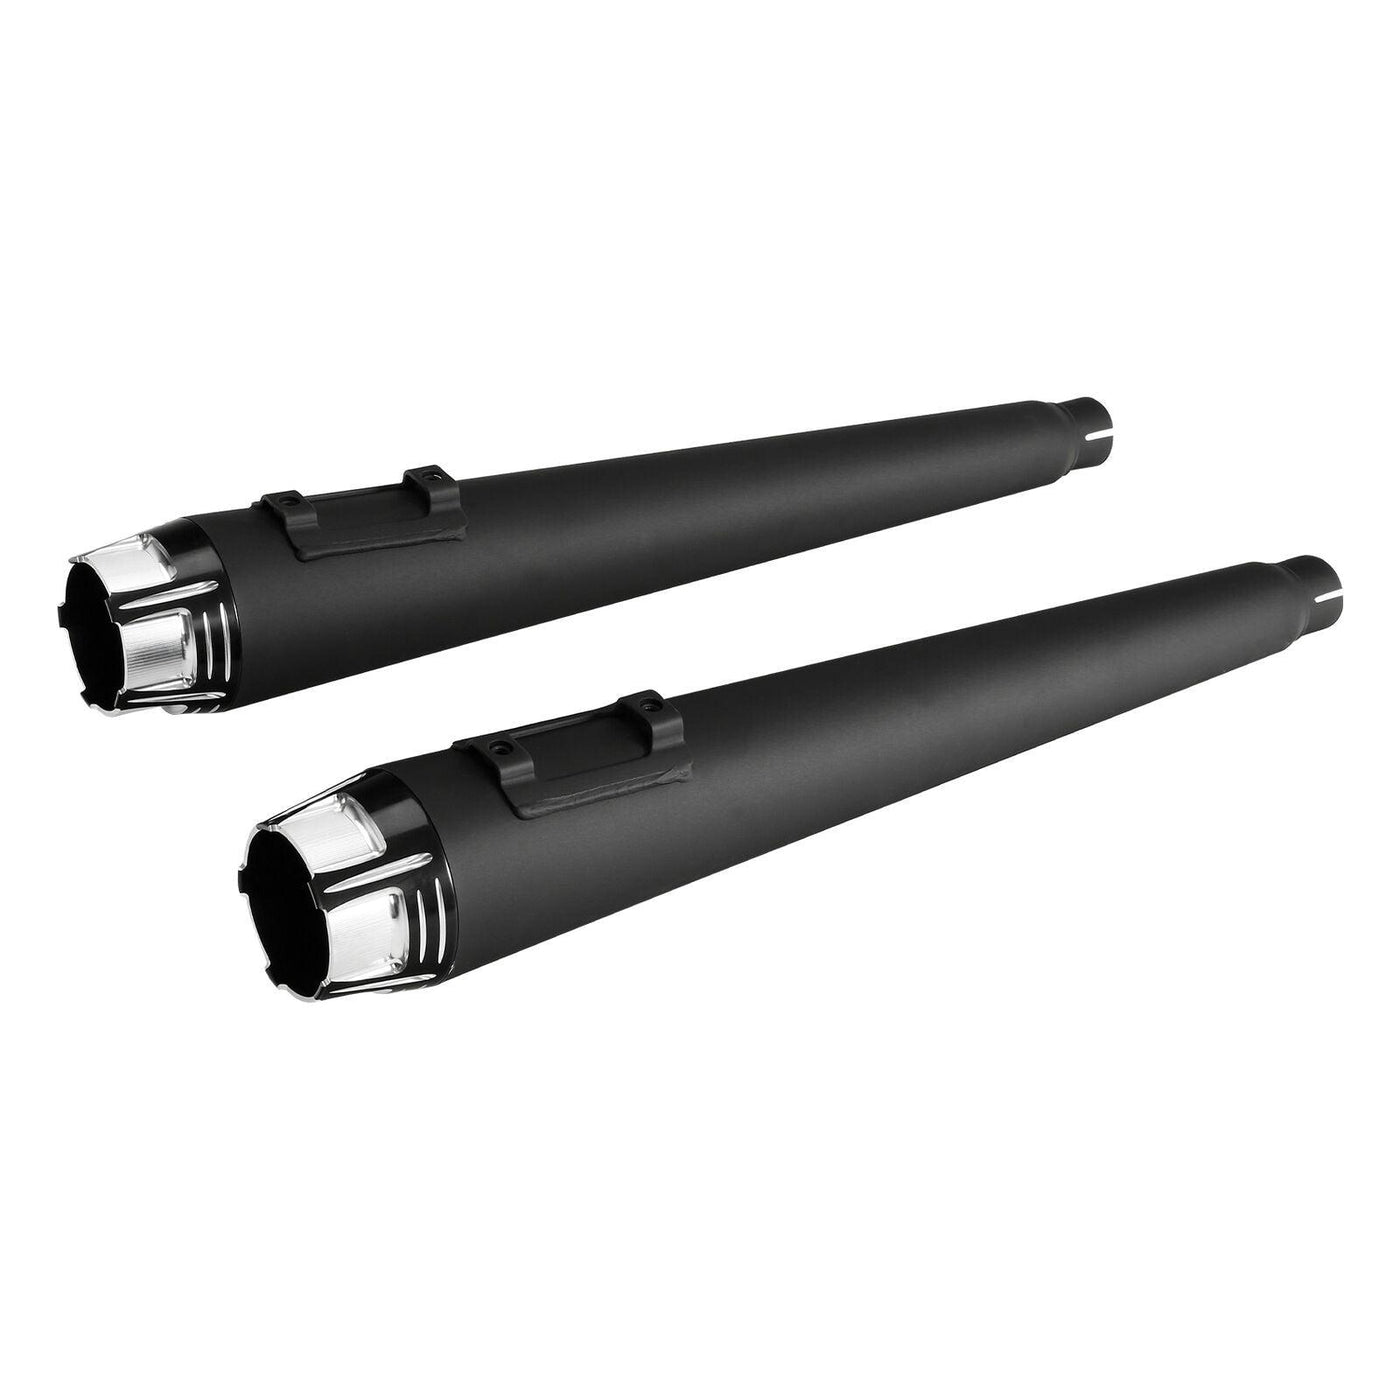 Black Megaphone Slip-On Mufflers Dual Exhausts Fit For Harley Road Glide 95-16 - Moto Life Products